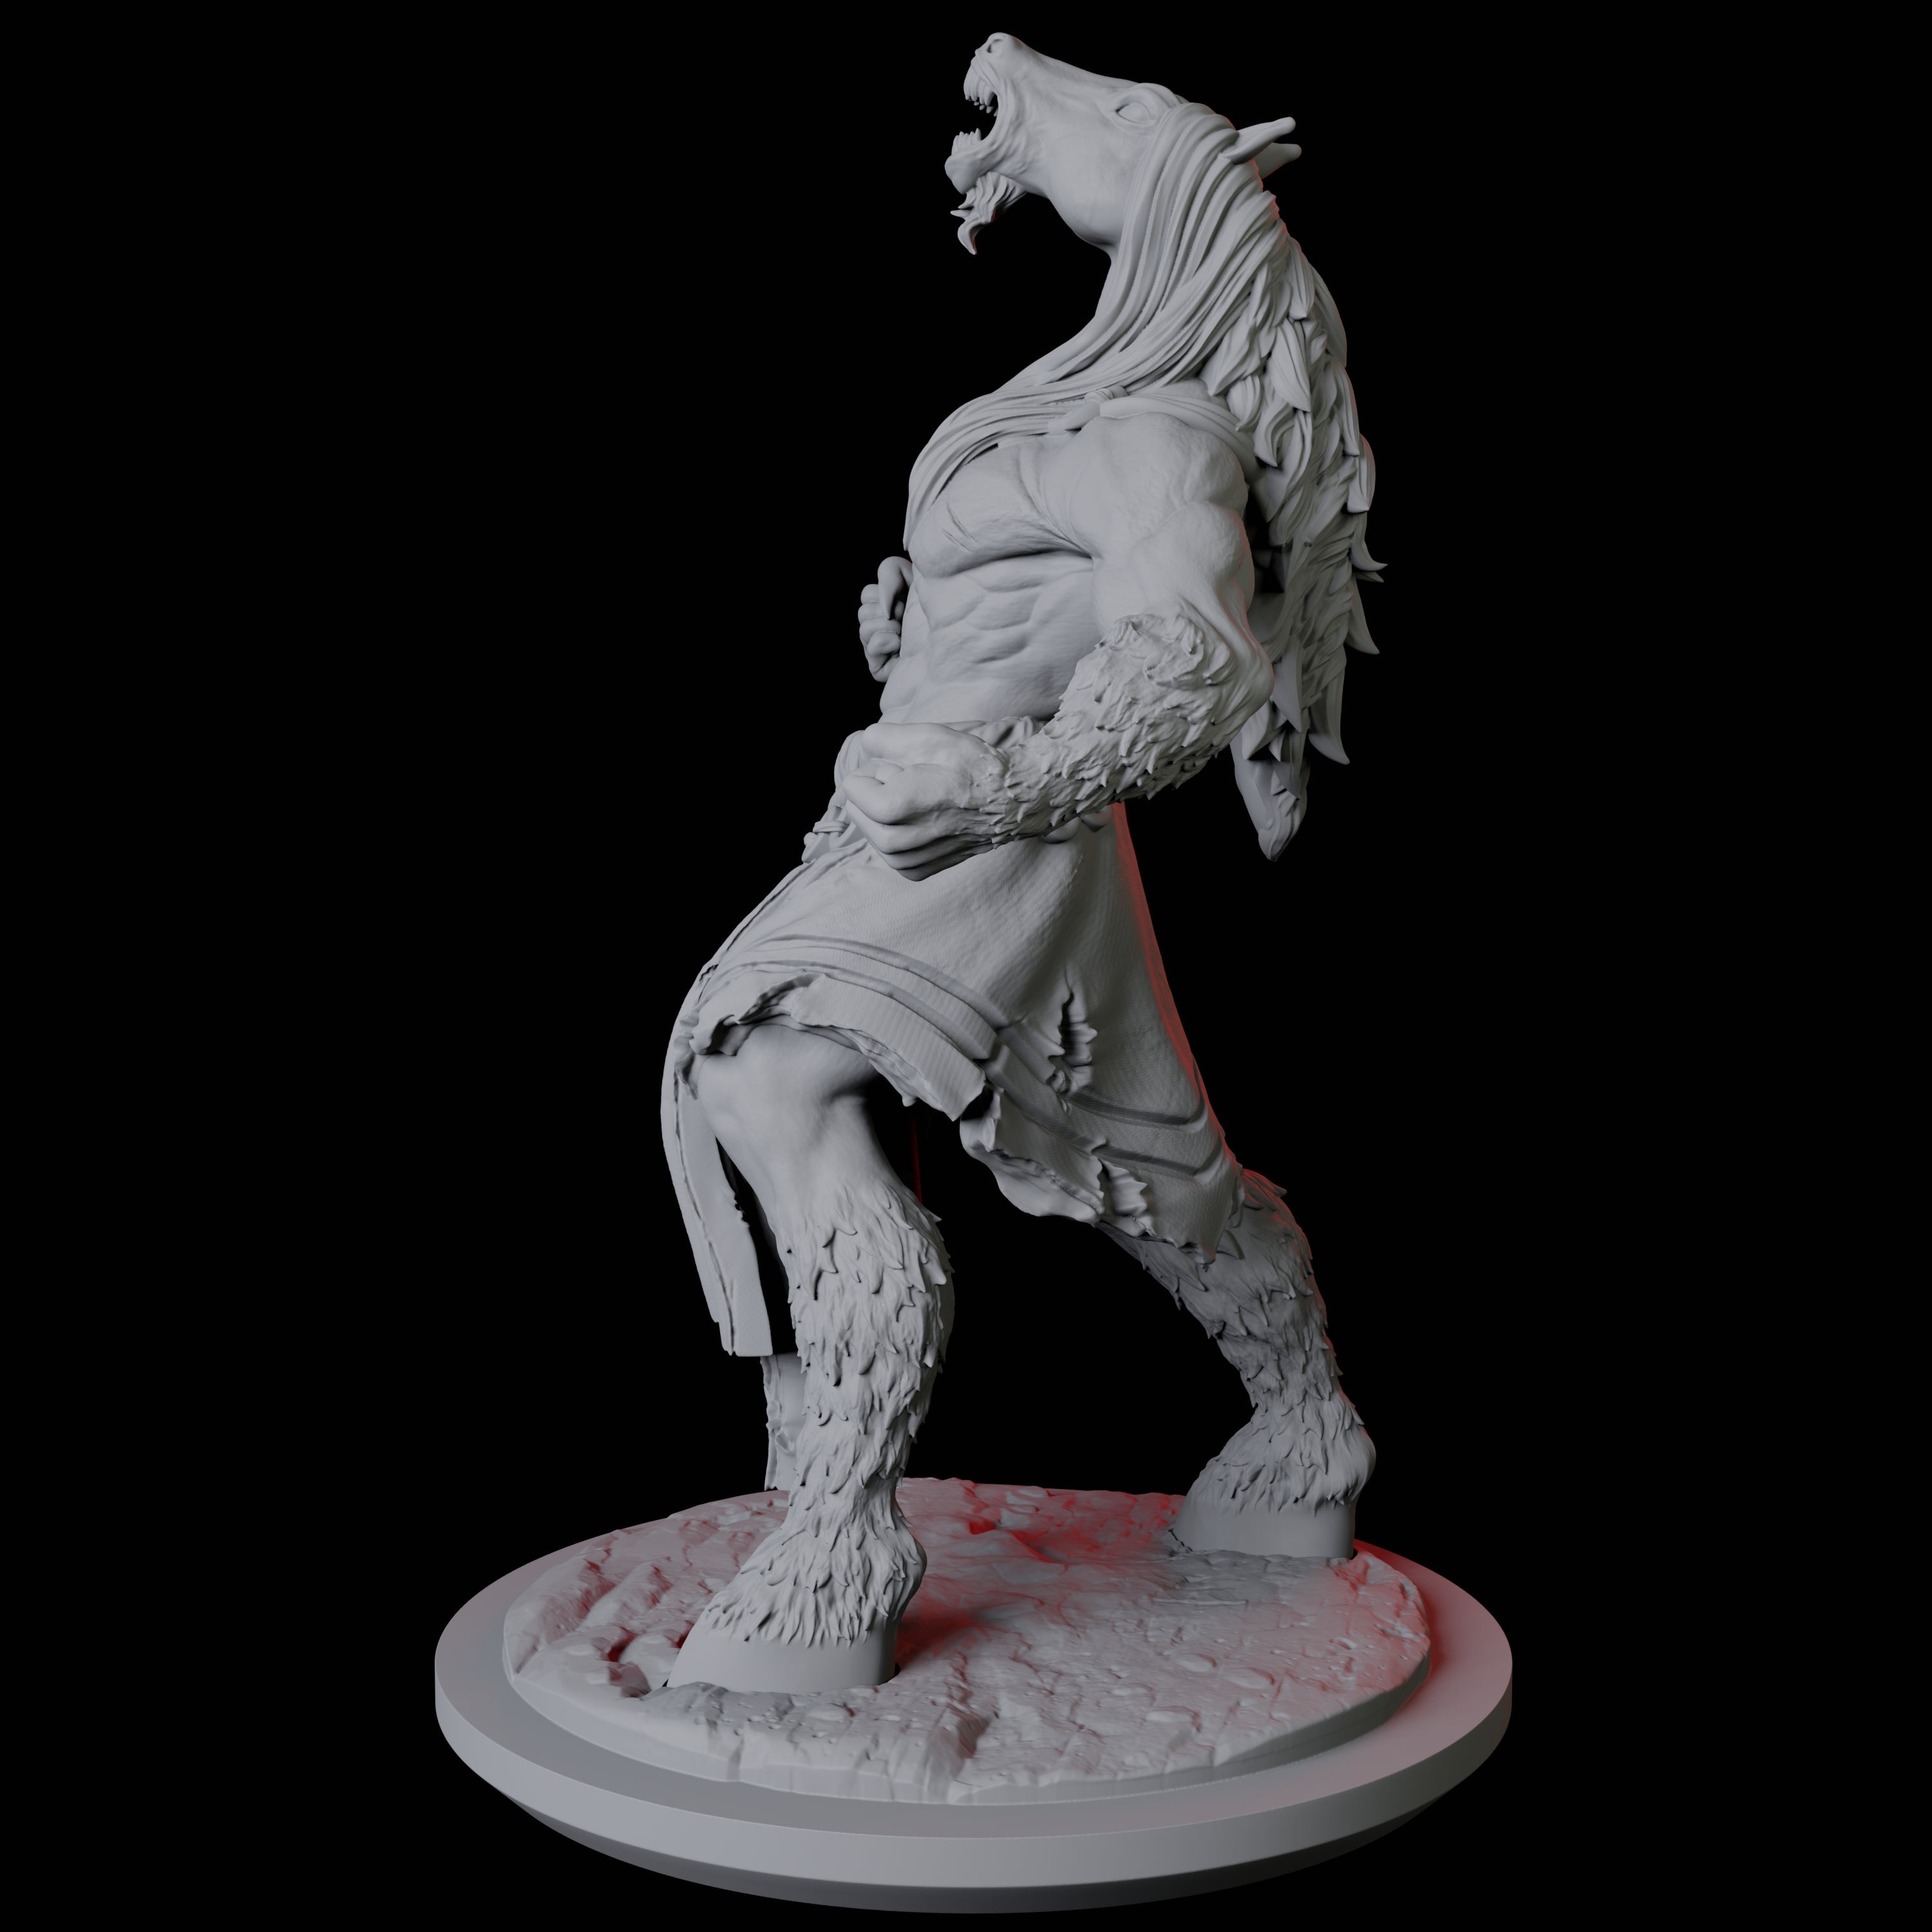 Neighing Reverse Centaur A Miniature for Dungeons and Dragons, Pathfinder or other TTRPGs